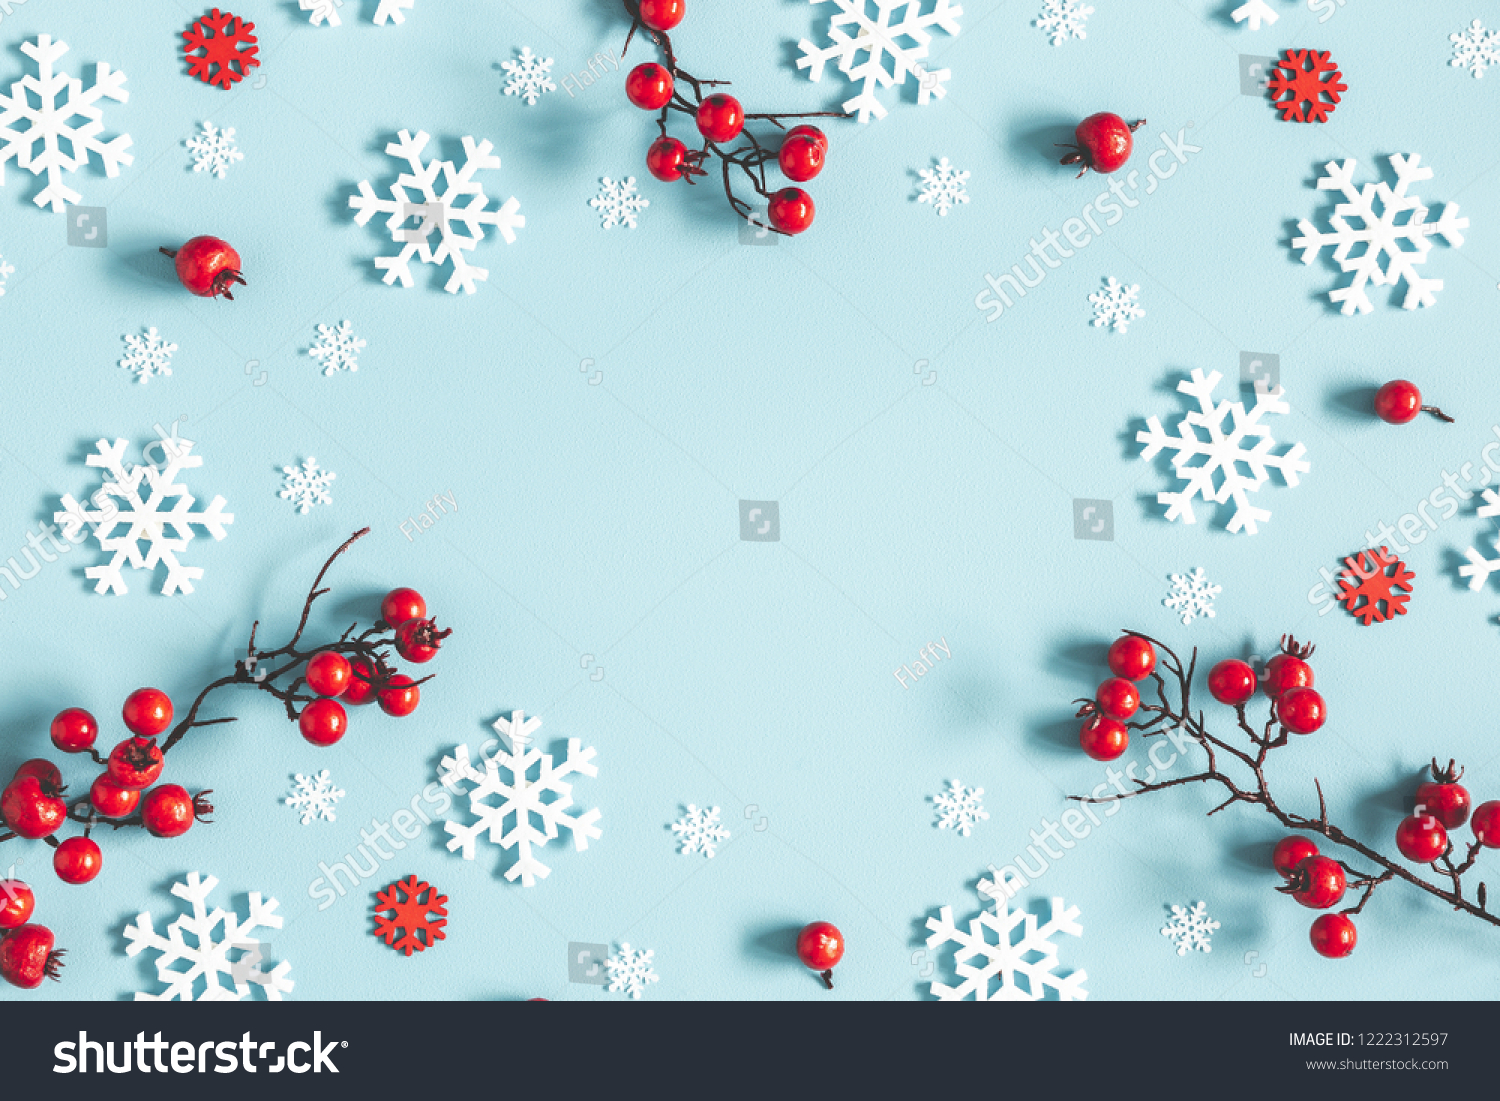 Christmas or winter composition. Frame made of snowflakes and red berries on pastel blue background. Christmas, winter, new year concept. Flat lay, top view, copy space #1222312597